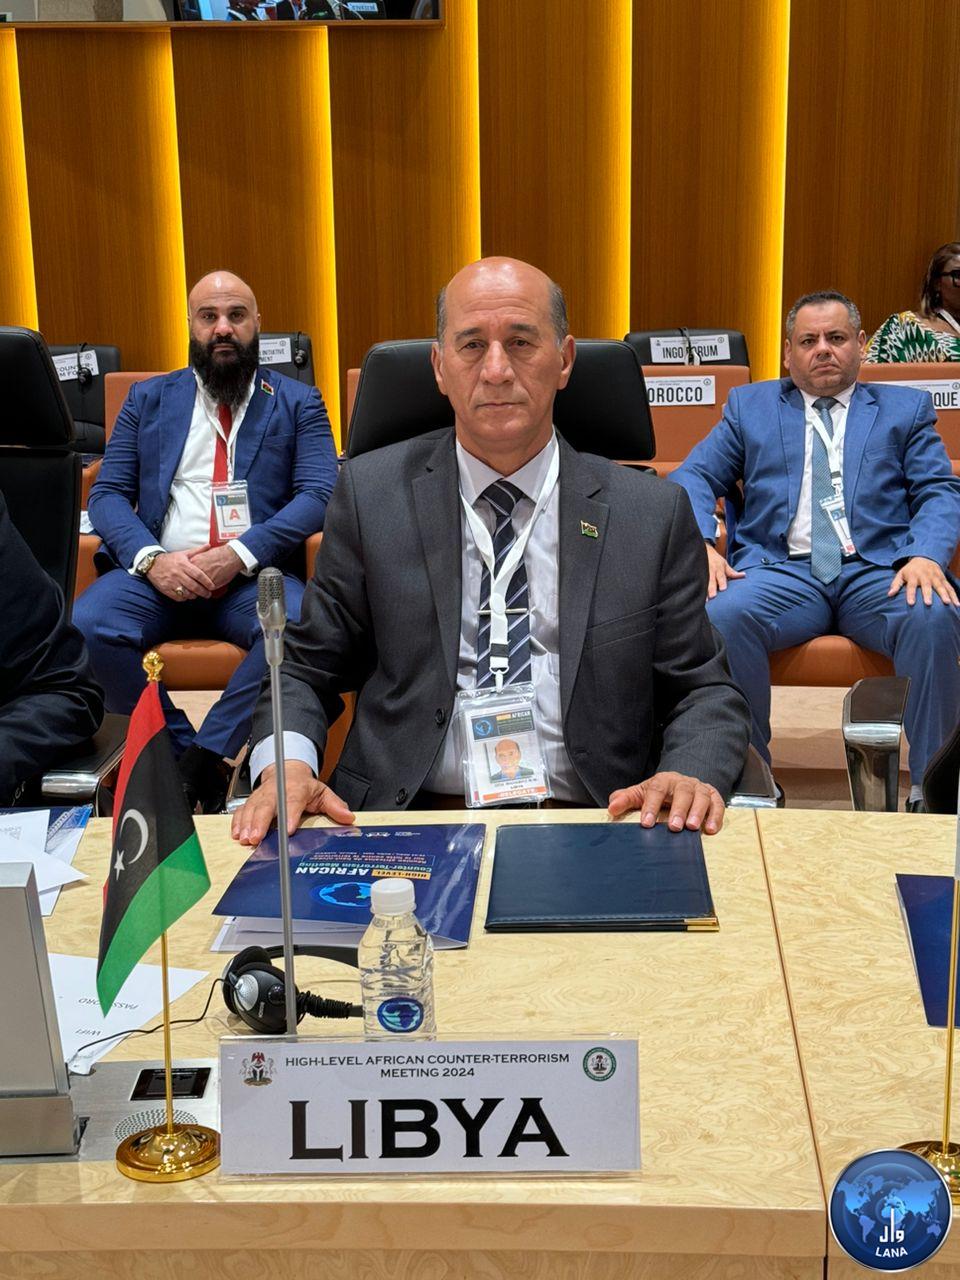 The Libyan delegation at the Abuja meeting to combat terrorism in Africa: Libya succeeded in eliminating terrorist groups